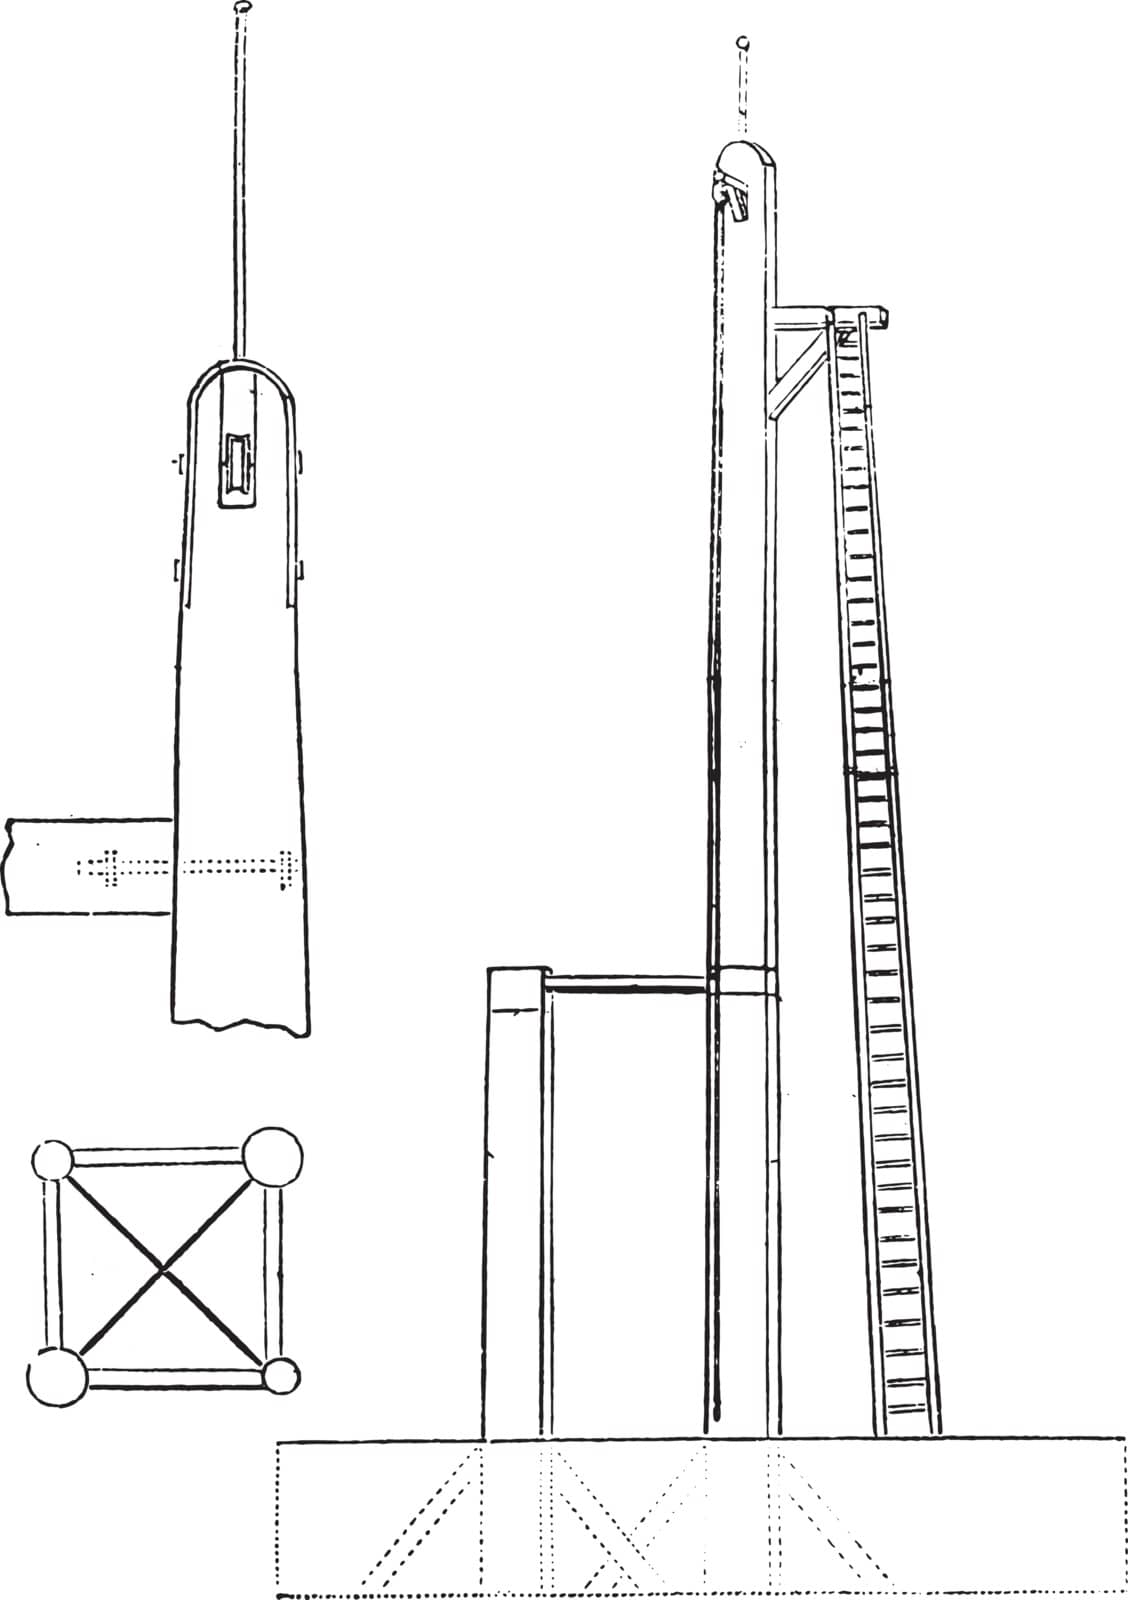 11. Mat connects vertical gantry, 12. Head of the vertical mast, 13. Plan of four vertical masts, vintage engraved illustration. Magasin Pittoresque 1845.
